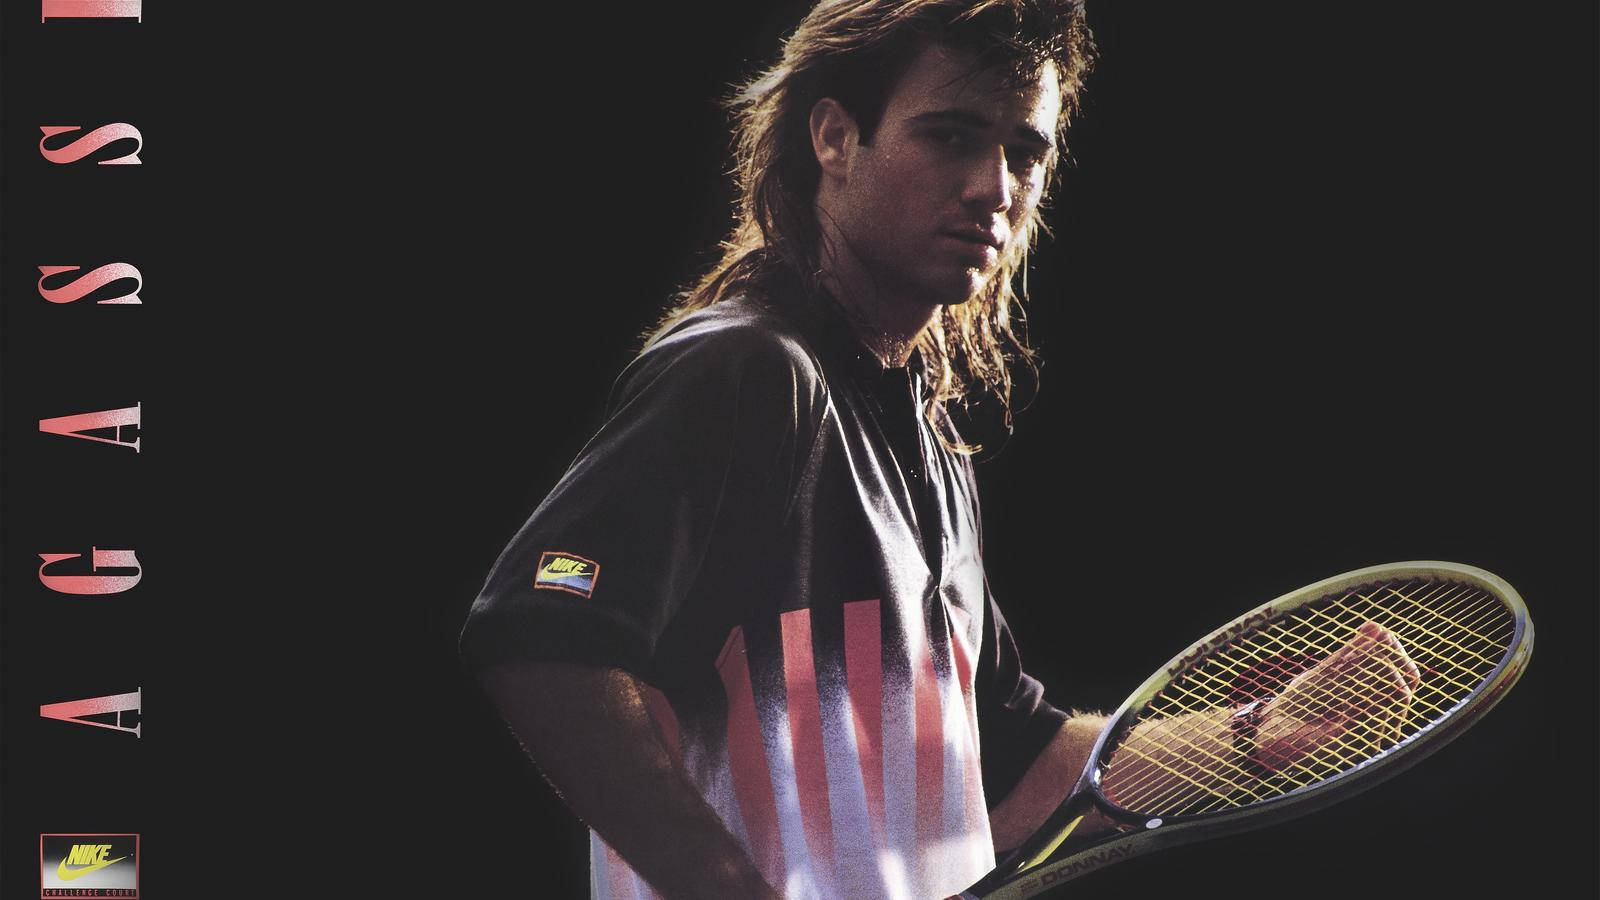 Andre Agassi in the zone with his racket Wallpaper